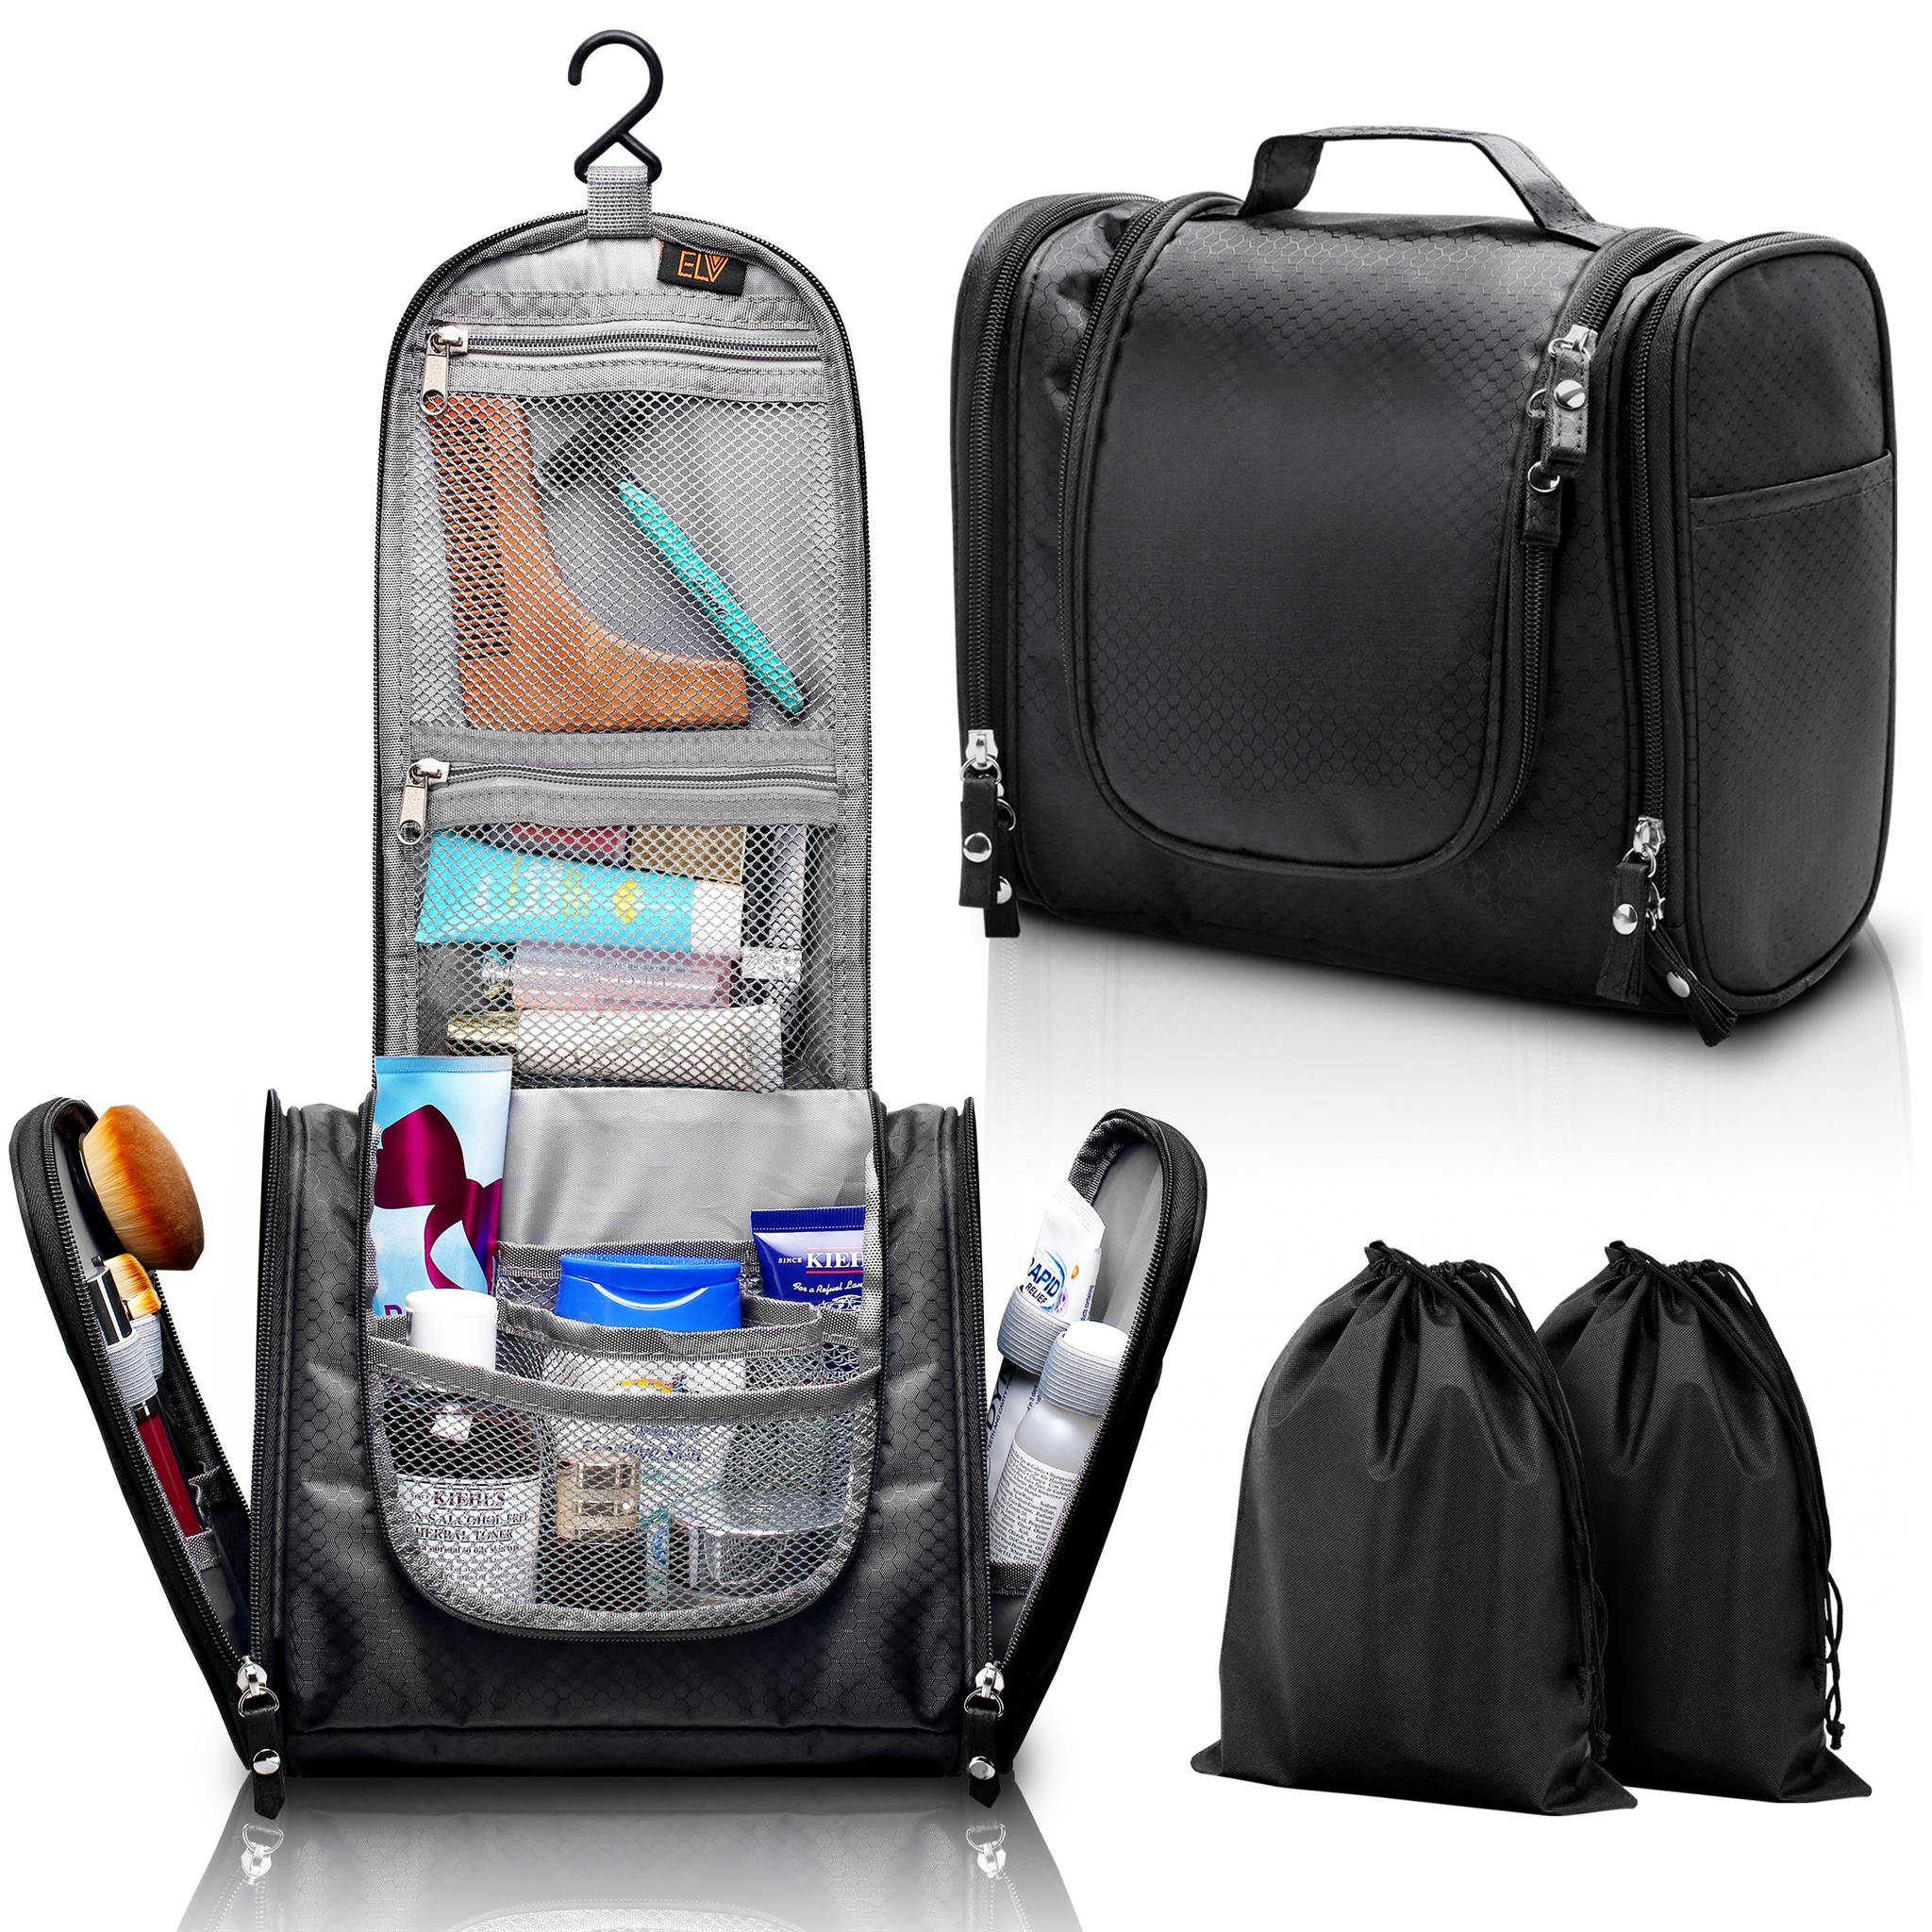 Hanging Toiletry Bag with Shoes Bags for $8.99 free shipping w/amazon prime - 0